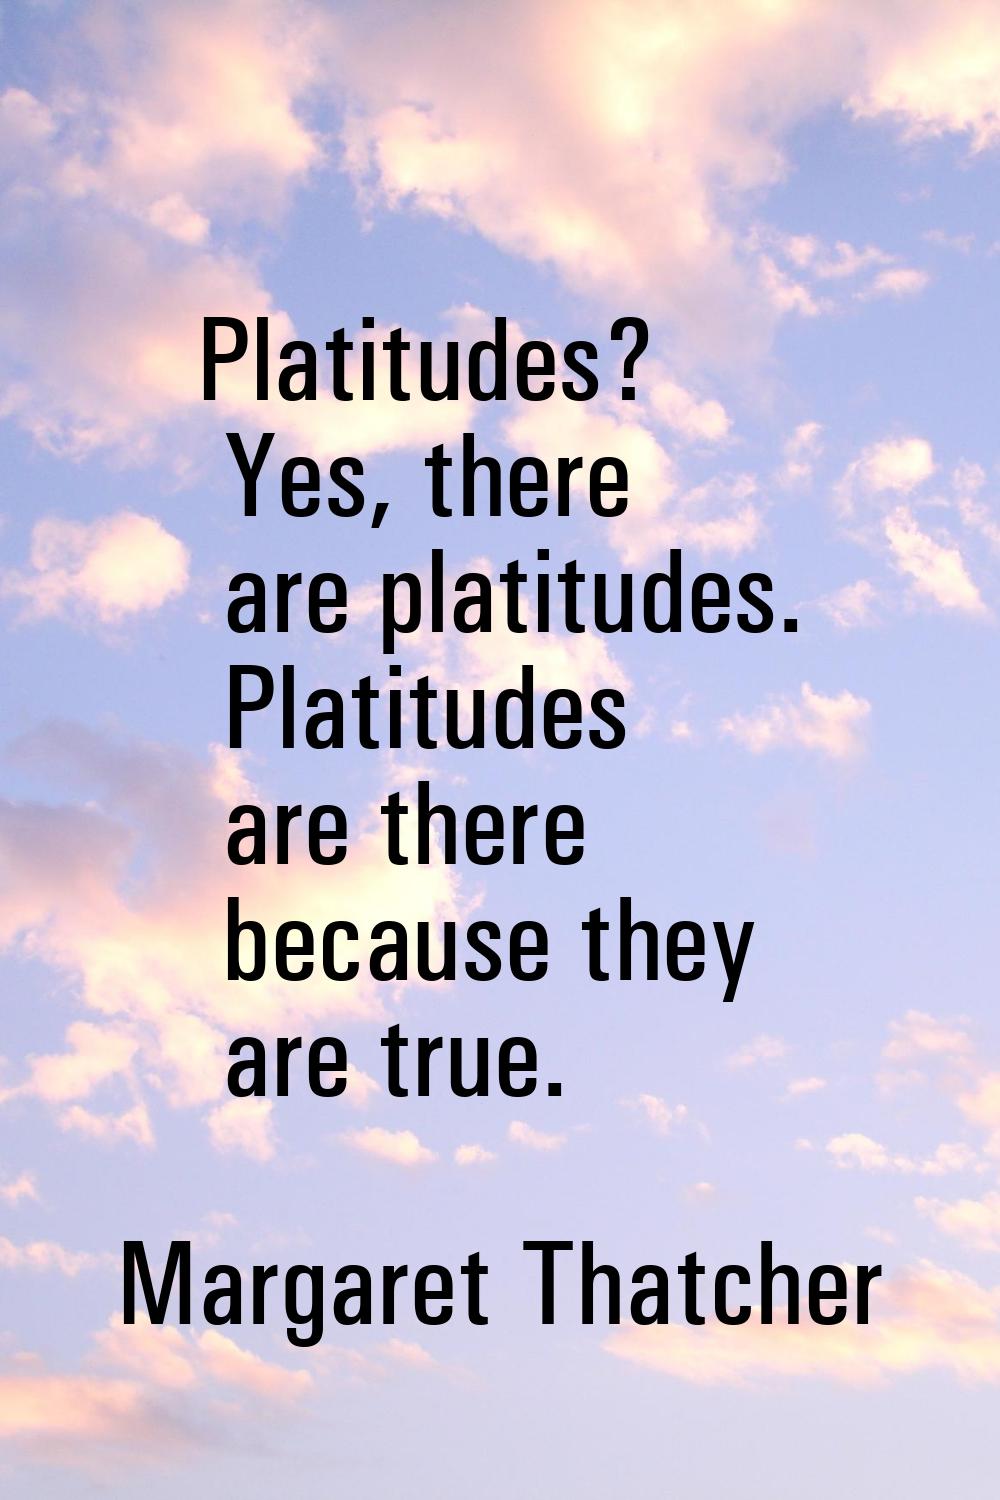 Platitudes? Yes, there are platitudes. Platitudes are there because they are true.